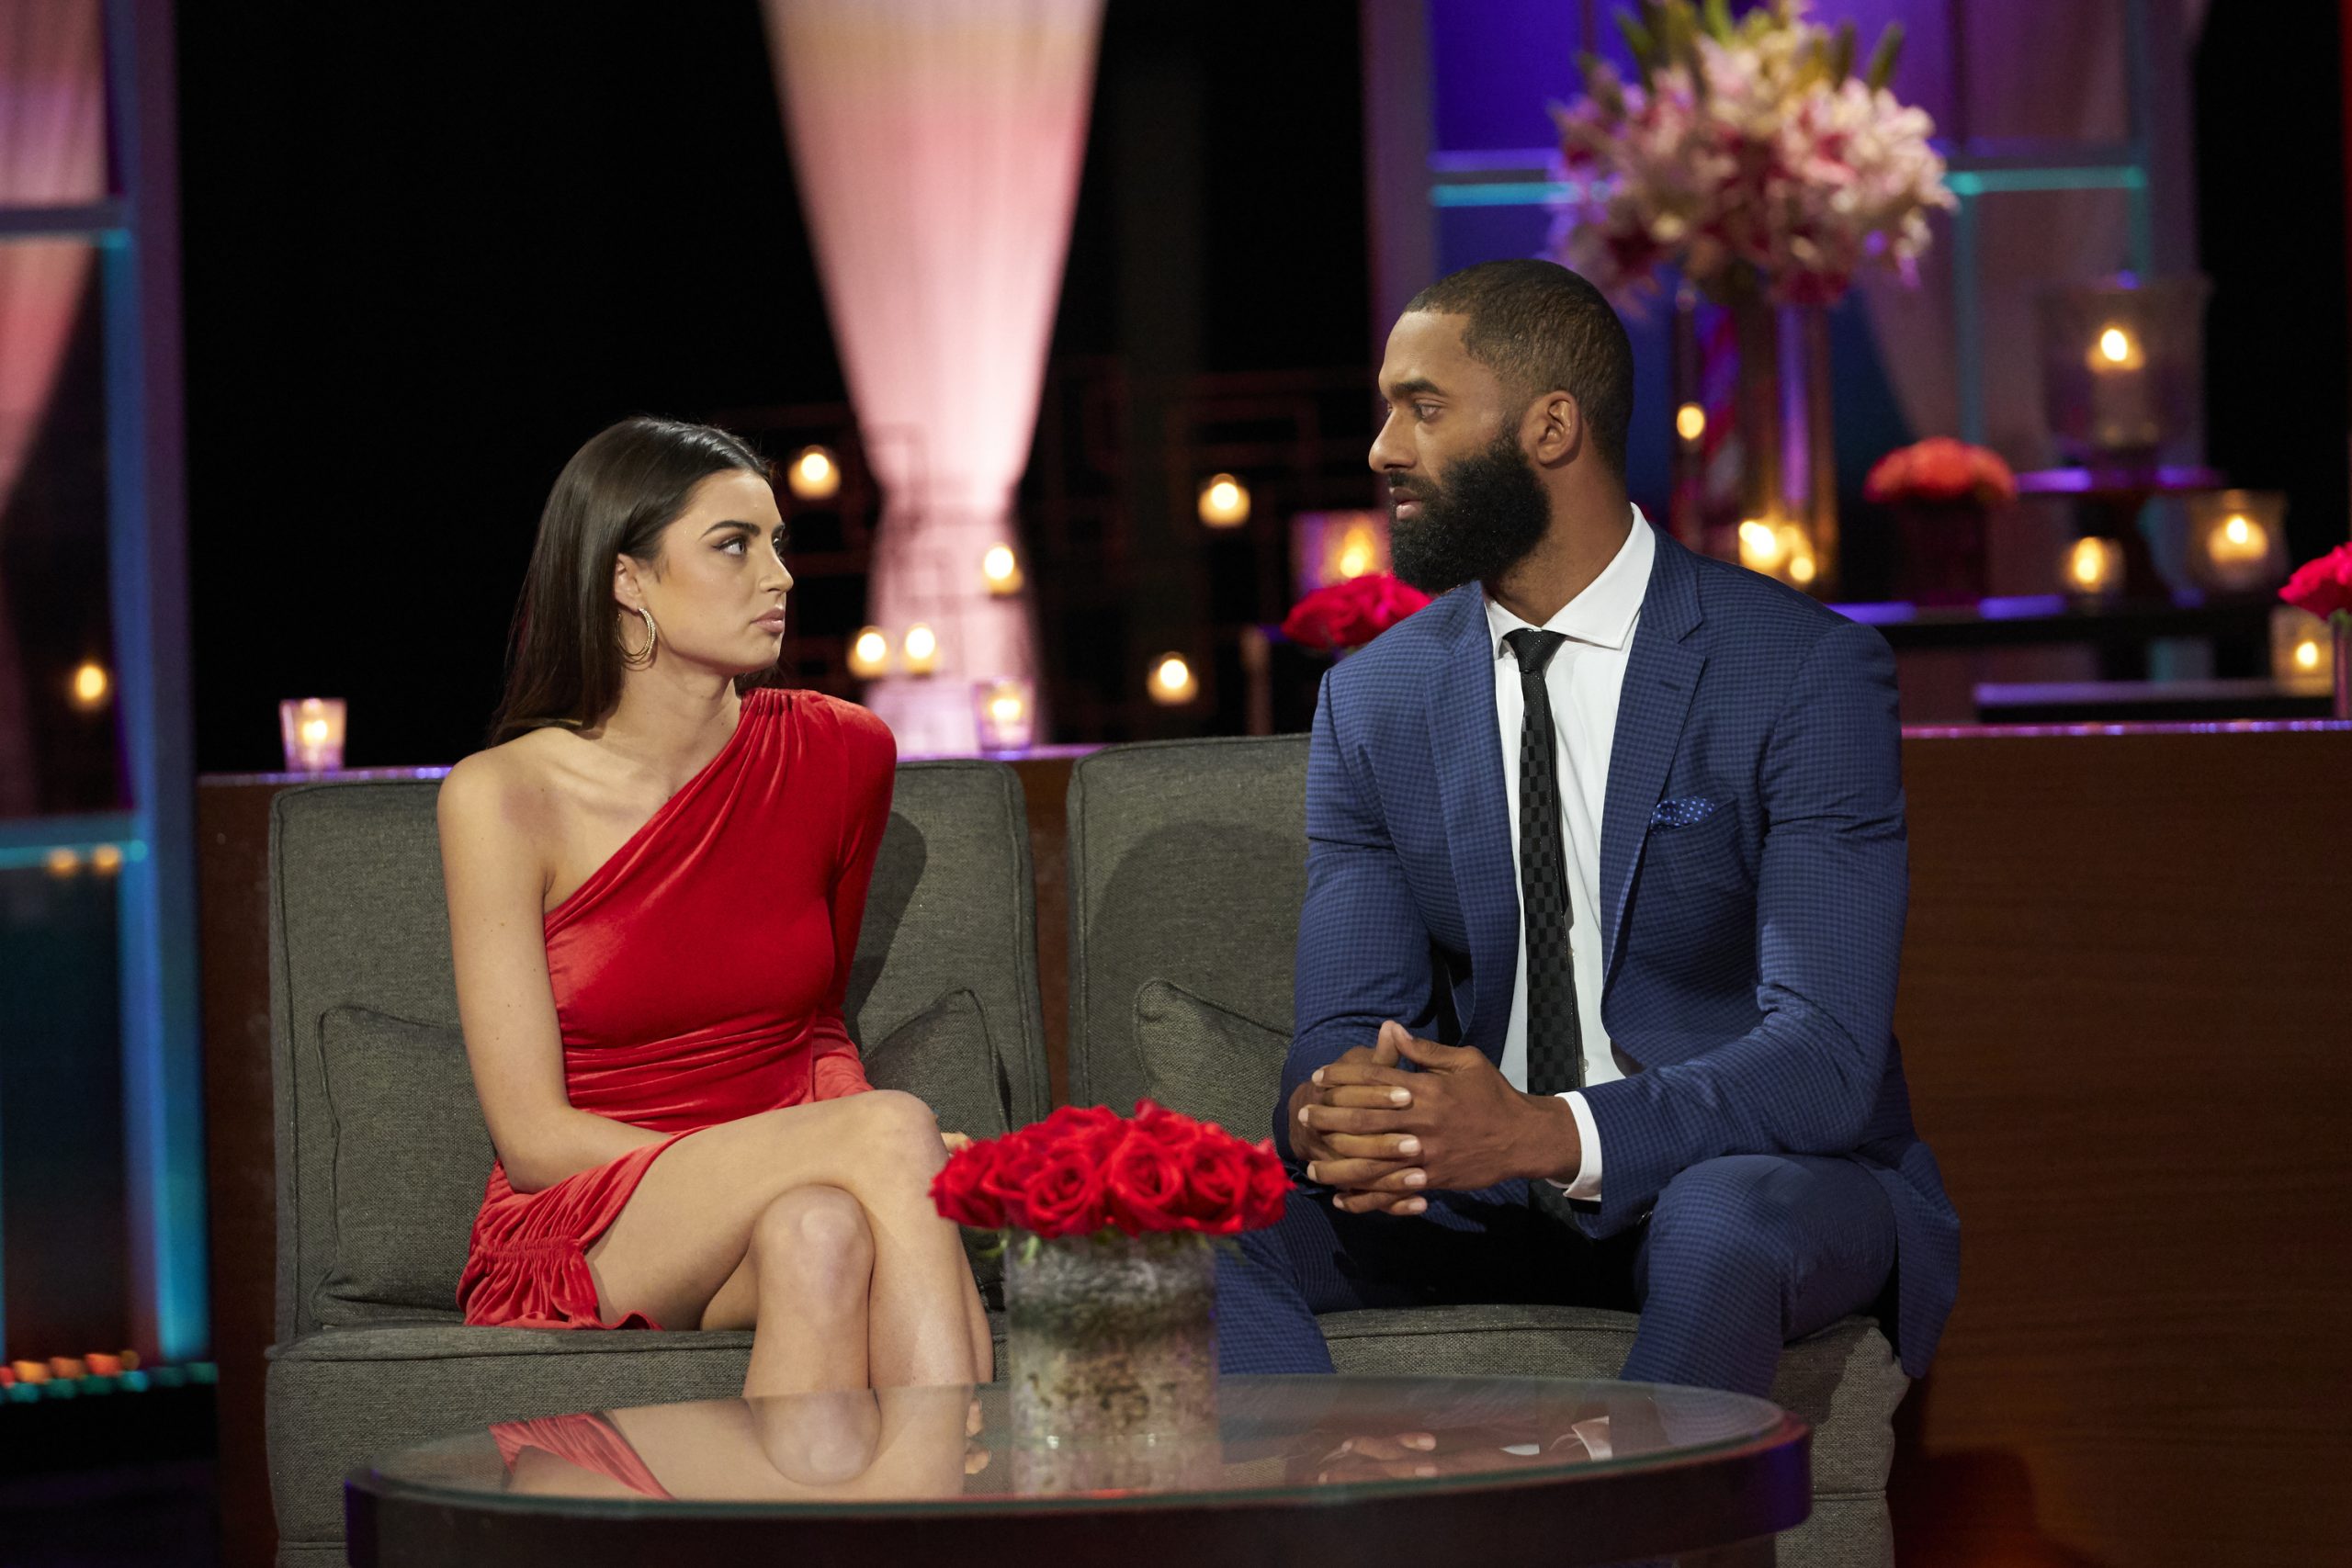 THE BACHELOR - ÒThe Bachelor: After the Final RoseÓ Ð On-air personality and bestselling author Emmanuel Acho hosts an emotional and impactful evening featuring touching reunions, heart-wrenching confrontations and powerful one-on-one talks with the final women as well as the Bachelor himself, Matt James. Plus Ðjust when you thought the twists and turns were finished Ð a shocking announcement that will have Bachelor Nation talking, all on ÒThe Bachelor: After the Final Rose,Ó MONDAY, MARCH 15 (10:00-11:03 p.m. EDT), on ABC. (ABC/Craig Sjodin) RACHAEL, MATT JAMES